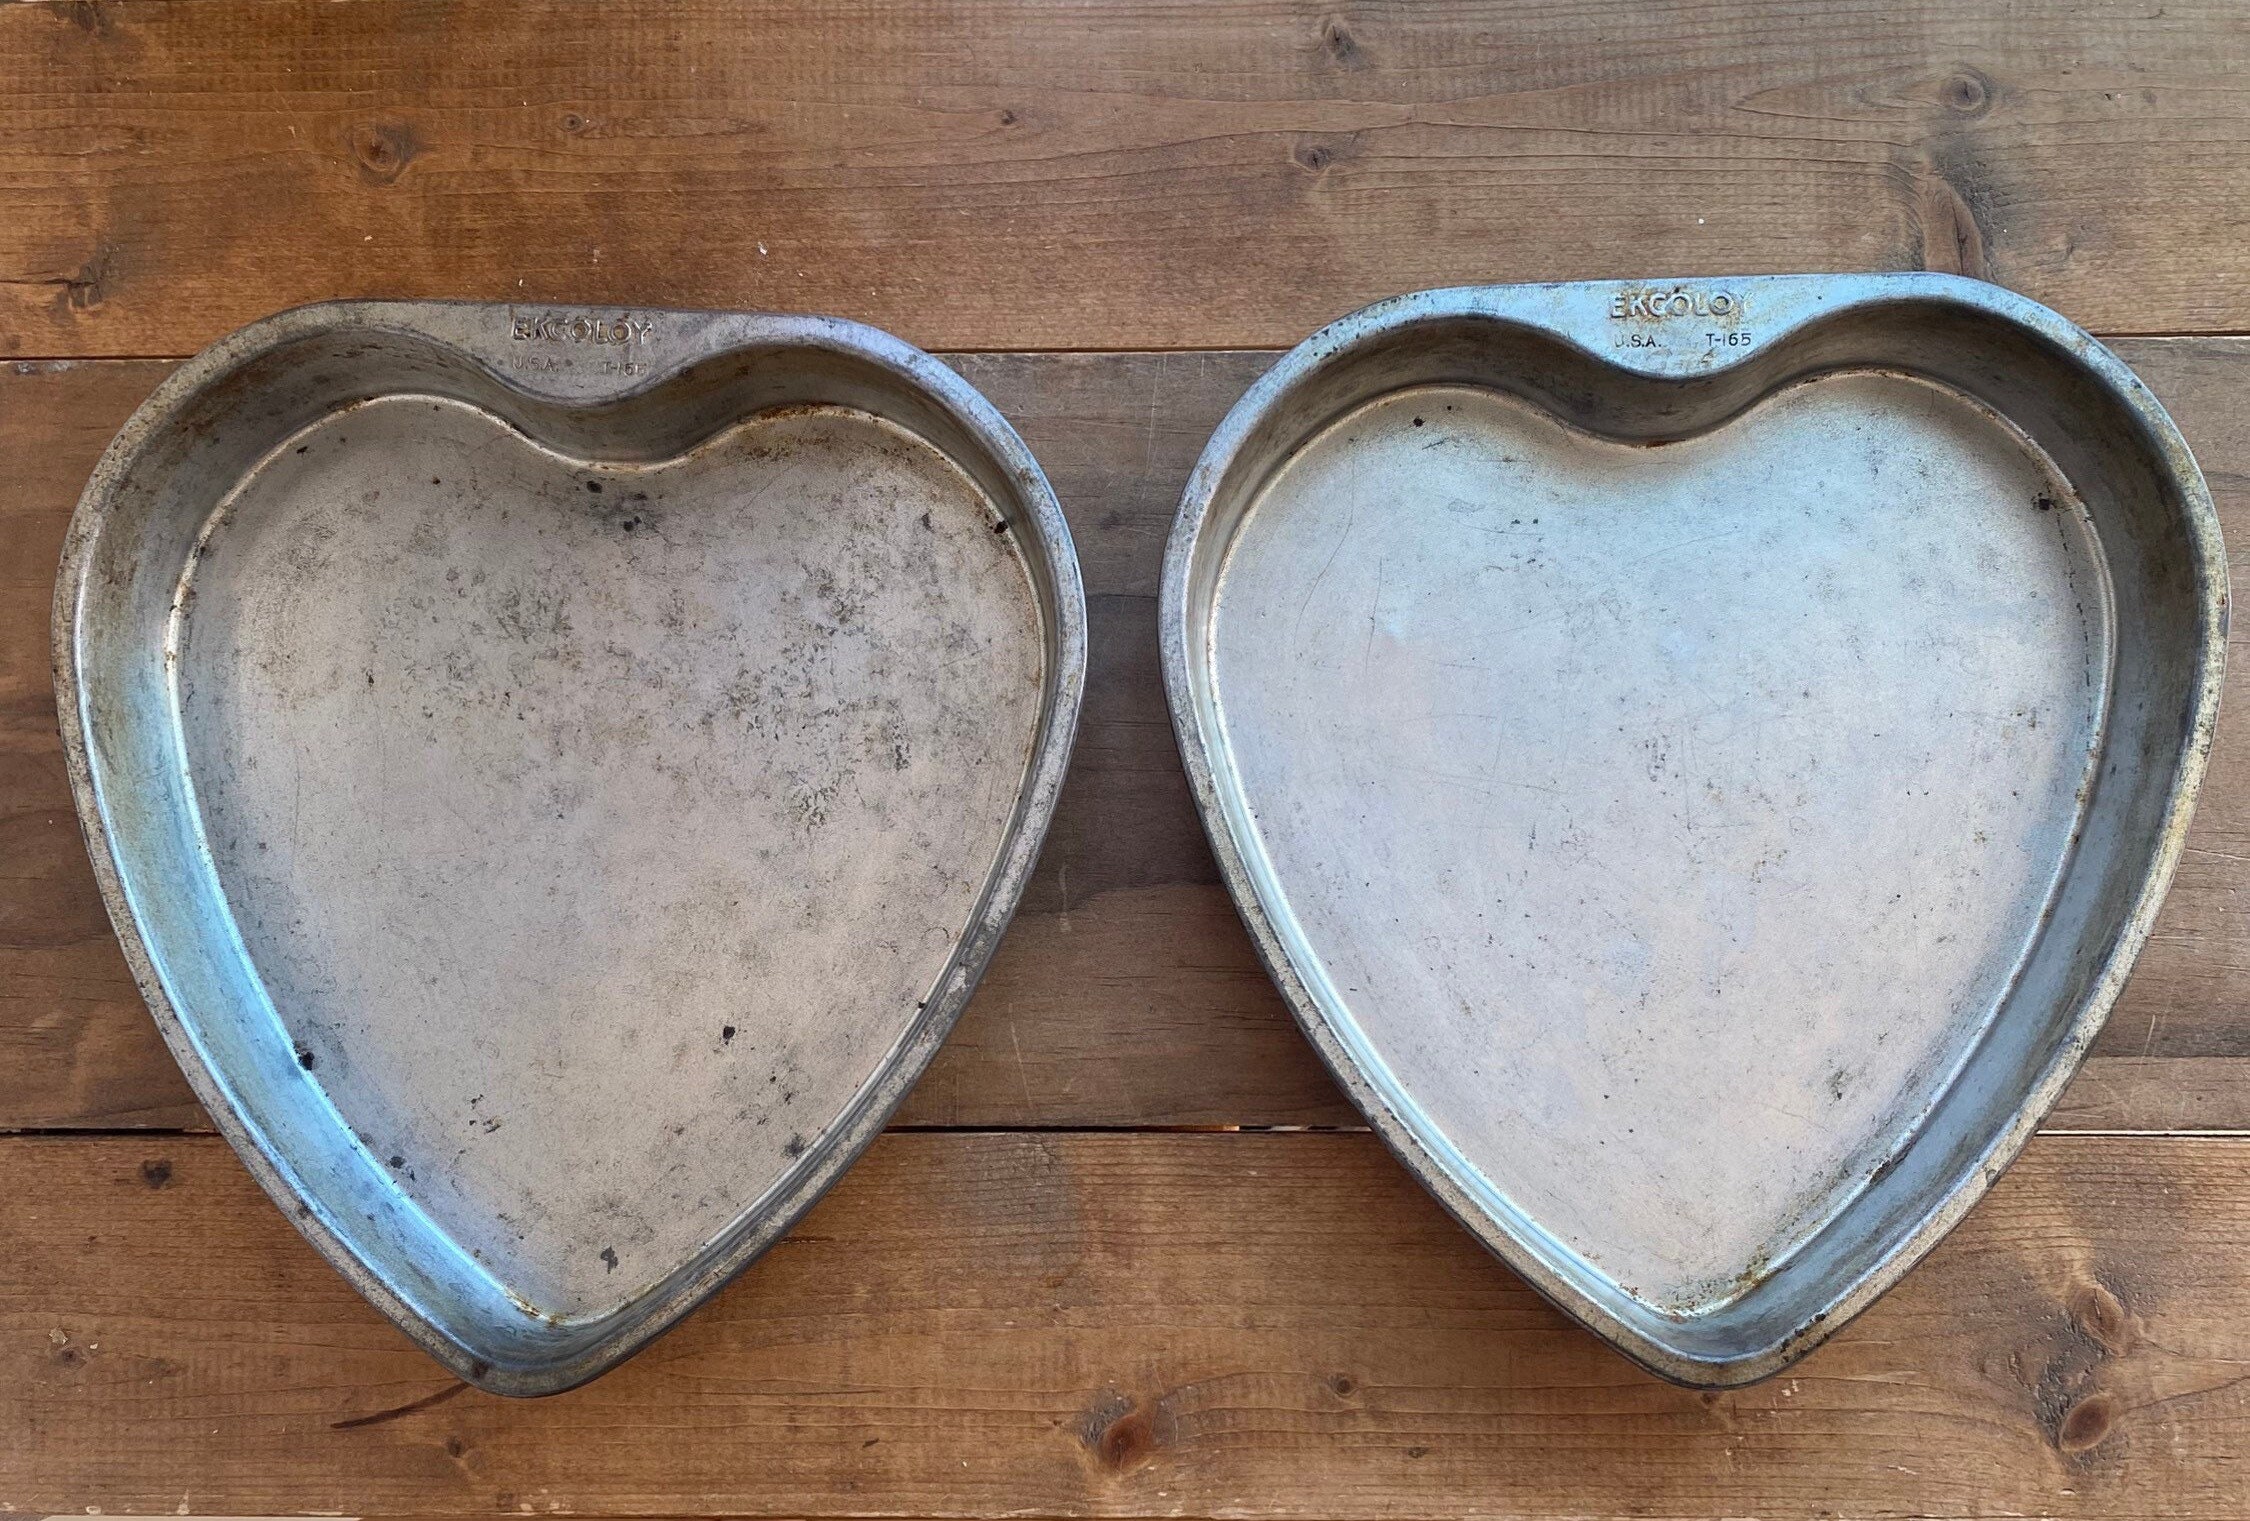 Pair of Vintage Heart Shaped Aluminum Cake Pans by Ekcoloy T-165 Made in  USA Kitchen Bakeware, Heart Wall Art, Wedding Decor 